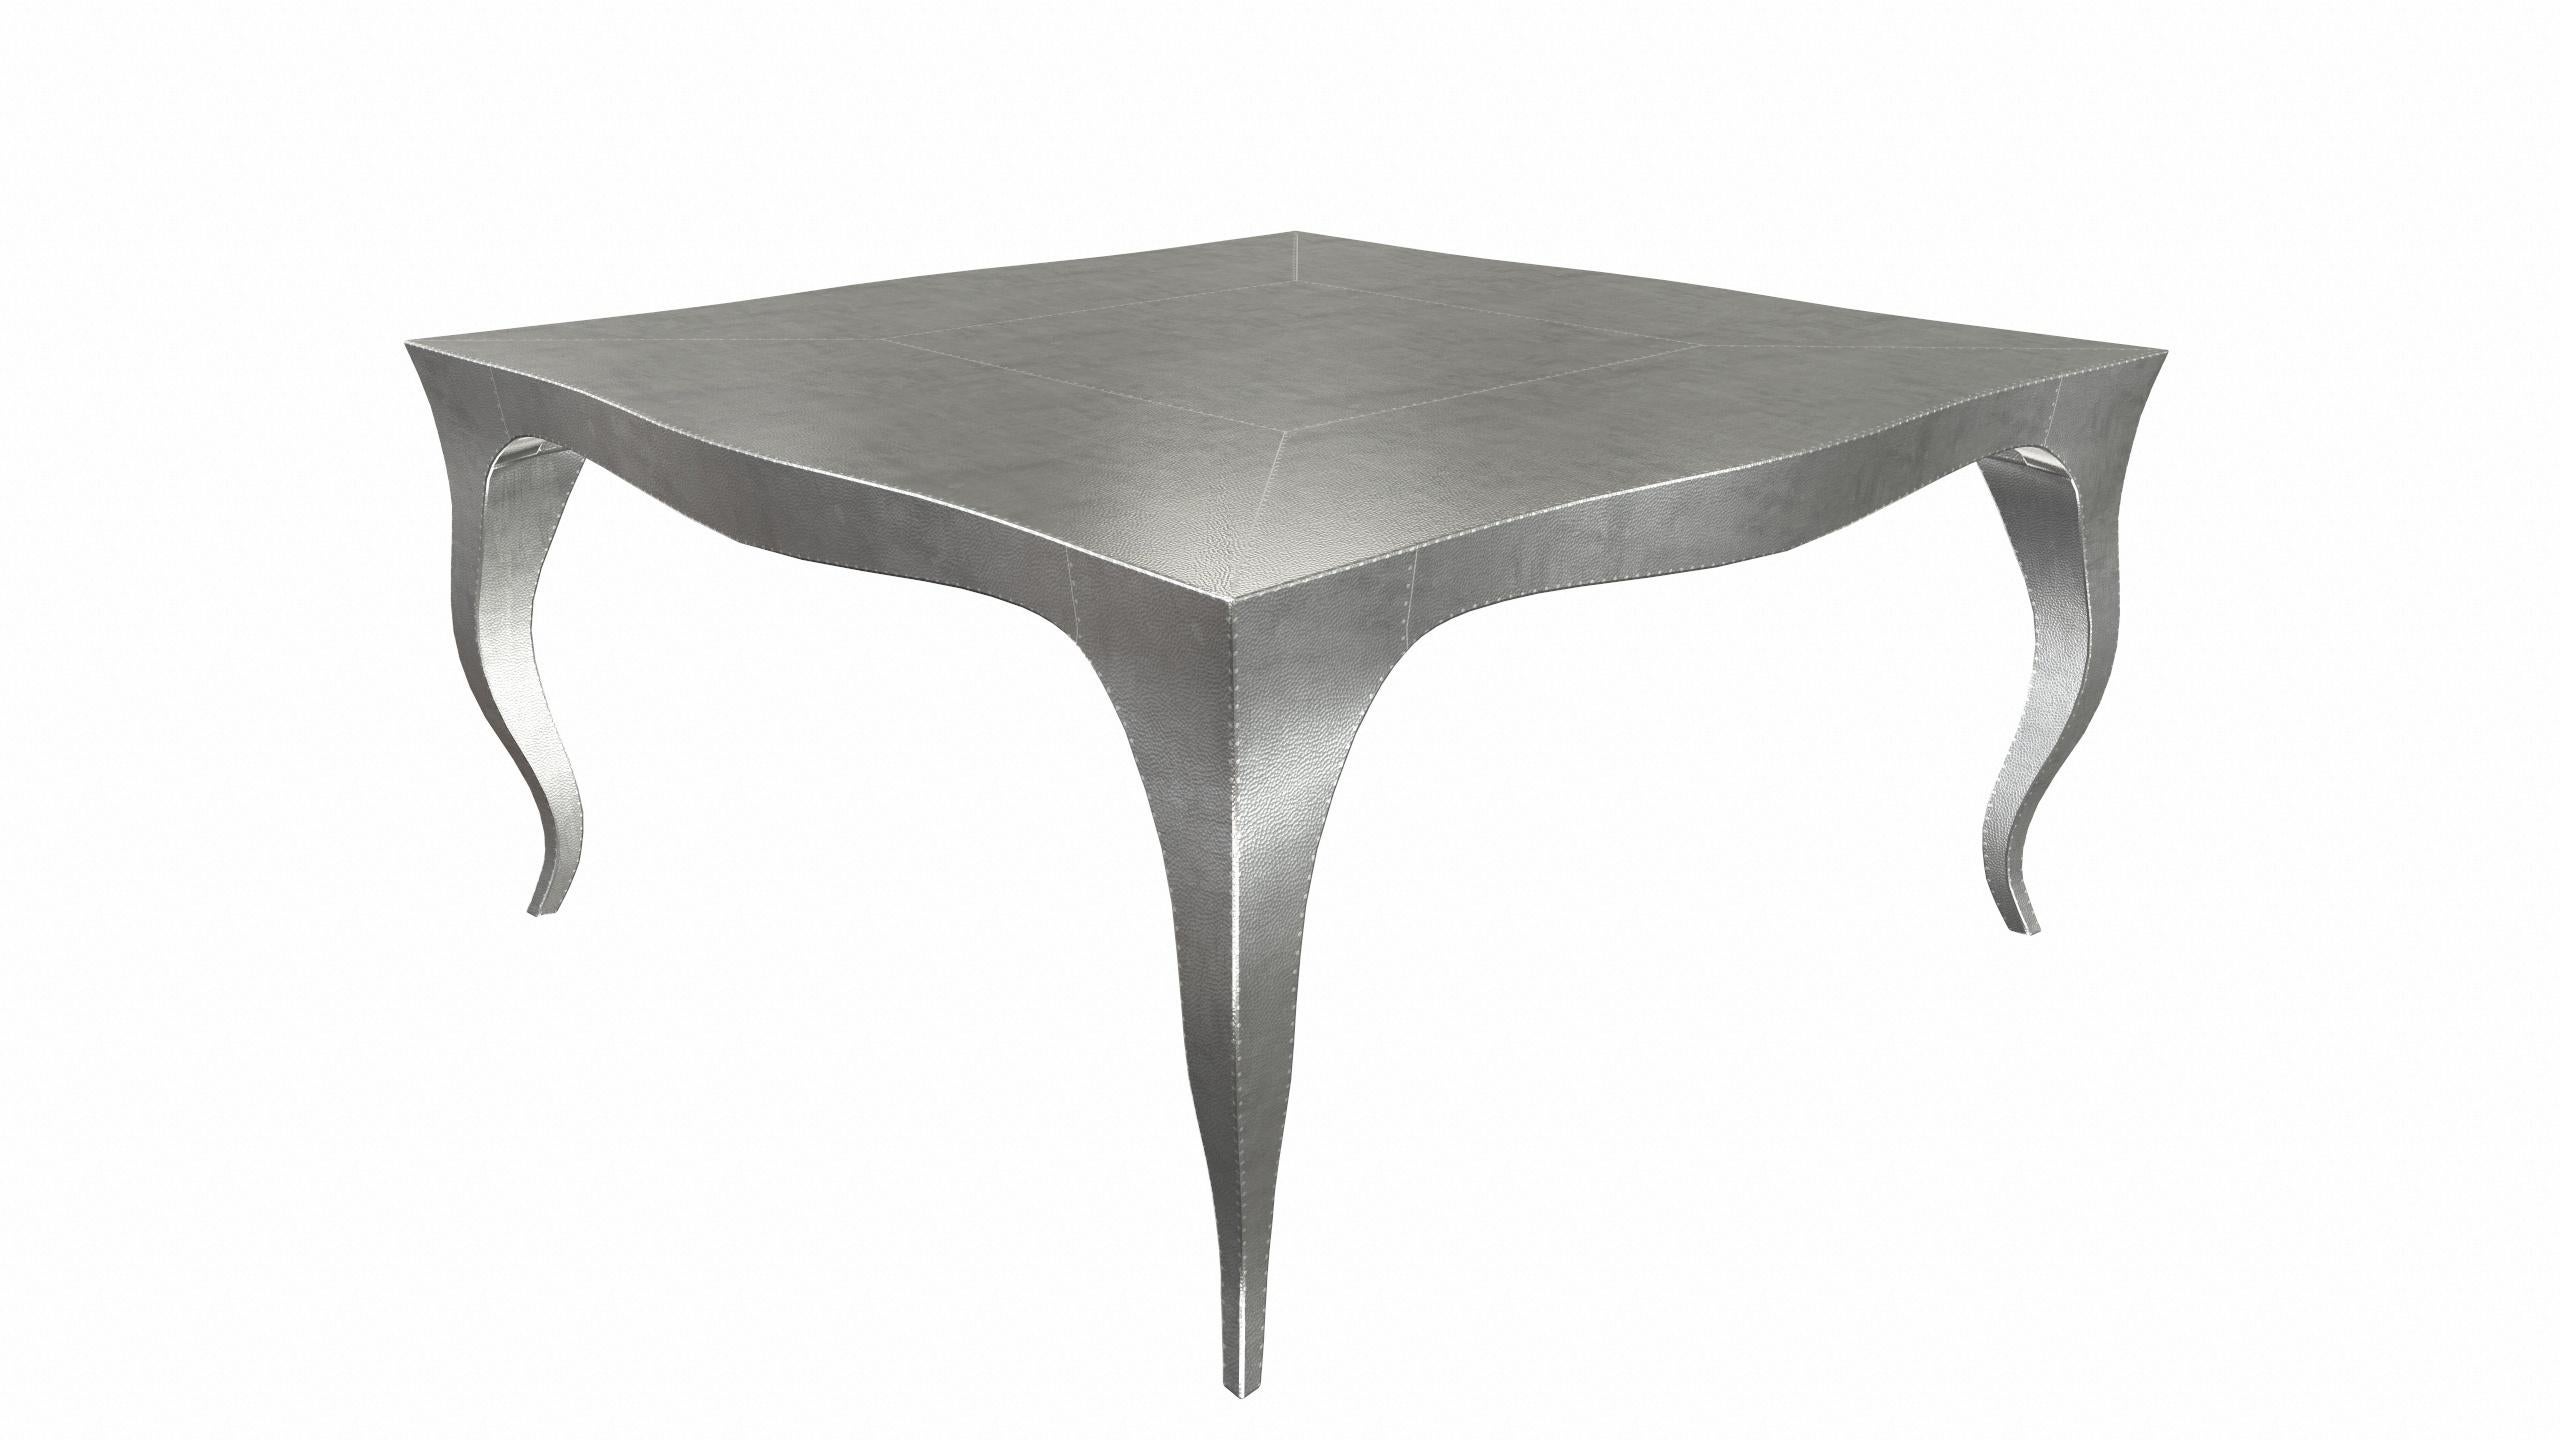 American Louise Art Deco Industrial Tables Mid. Hammered White Bronze 18.5x18.5x10 inch For Sale